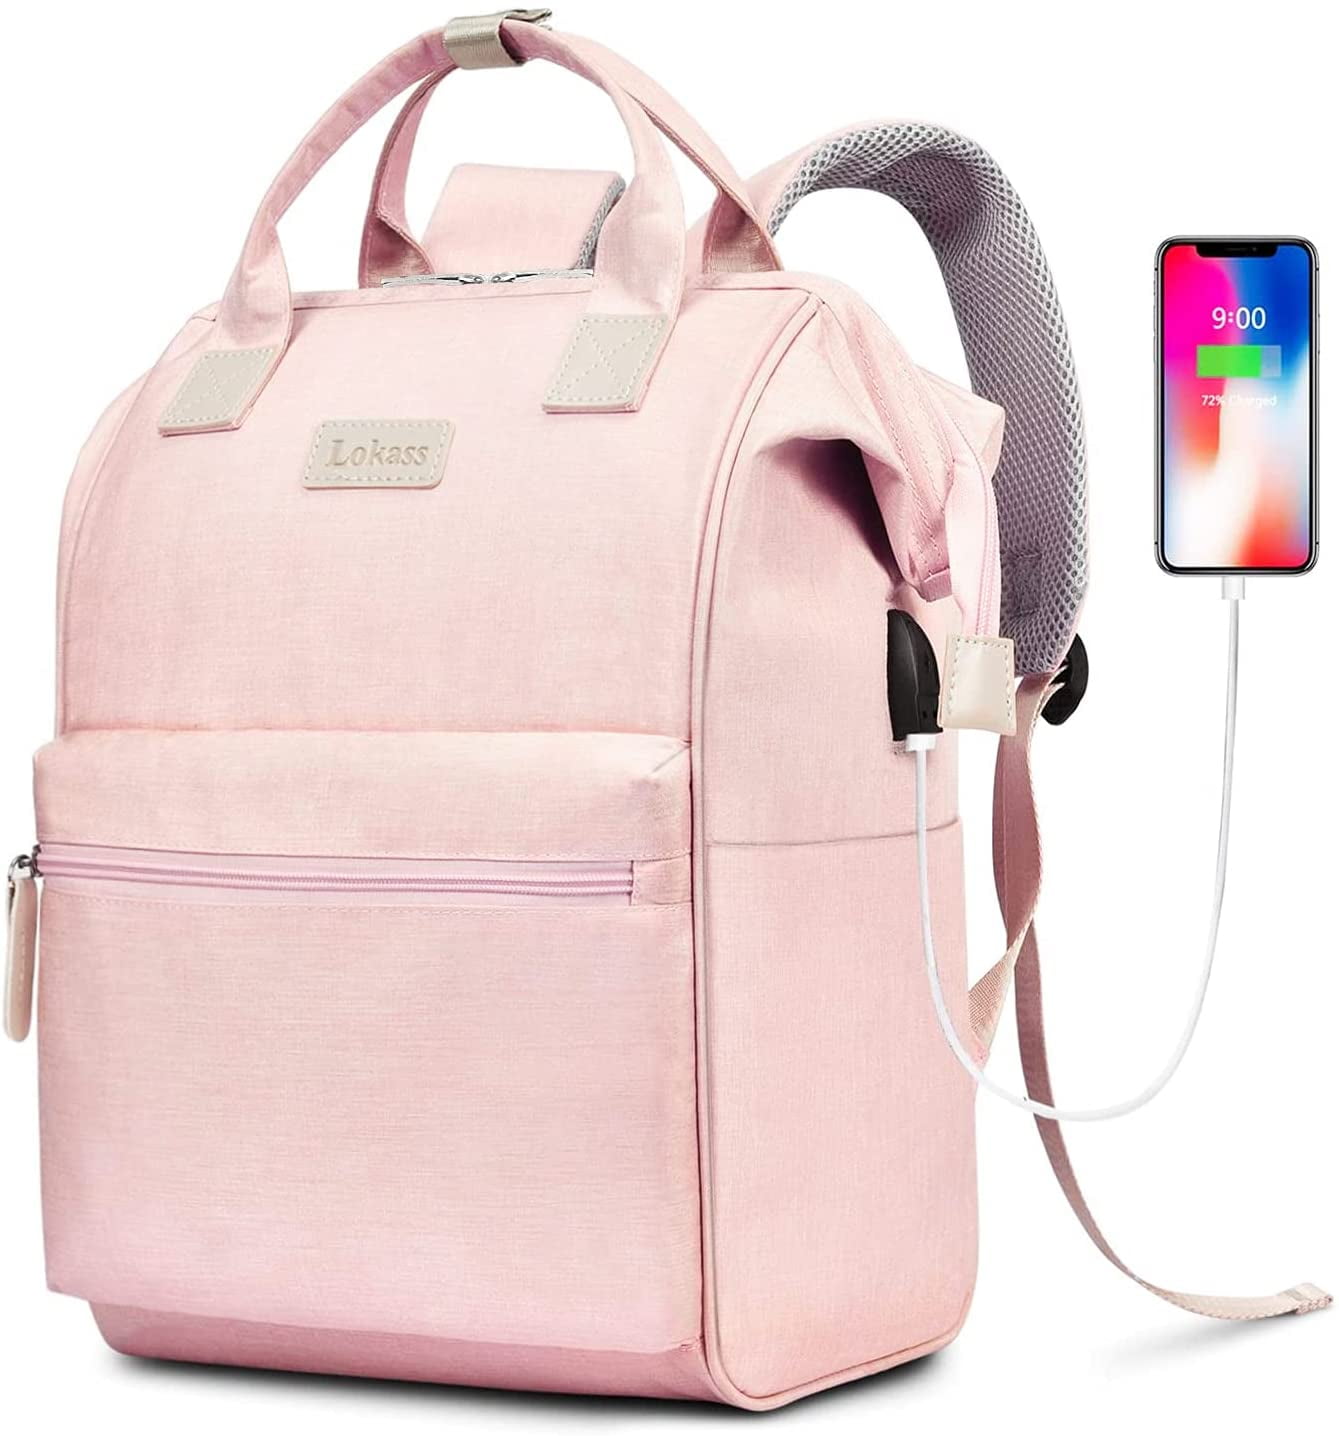 Sports Laptop Backpack Black White Swan Feather Daypack for Women with USB Charging Port and Headphone Port for College Work Travel